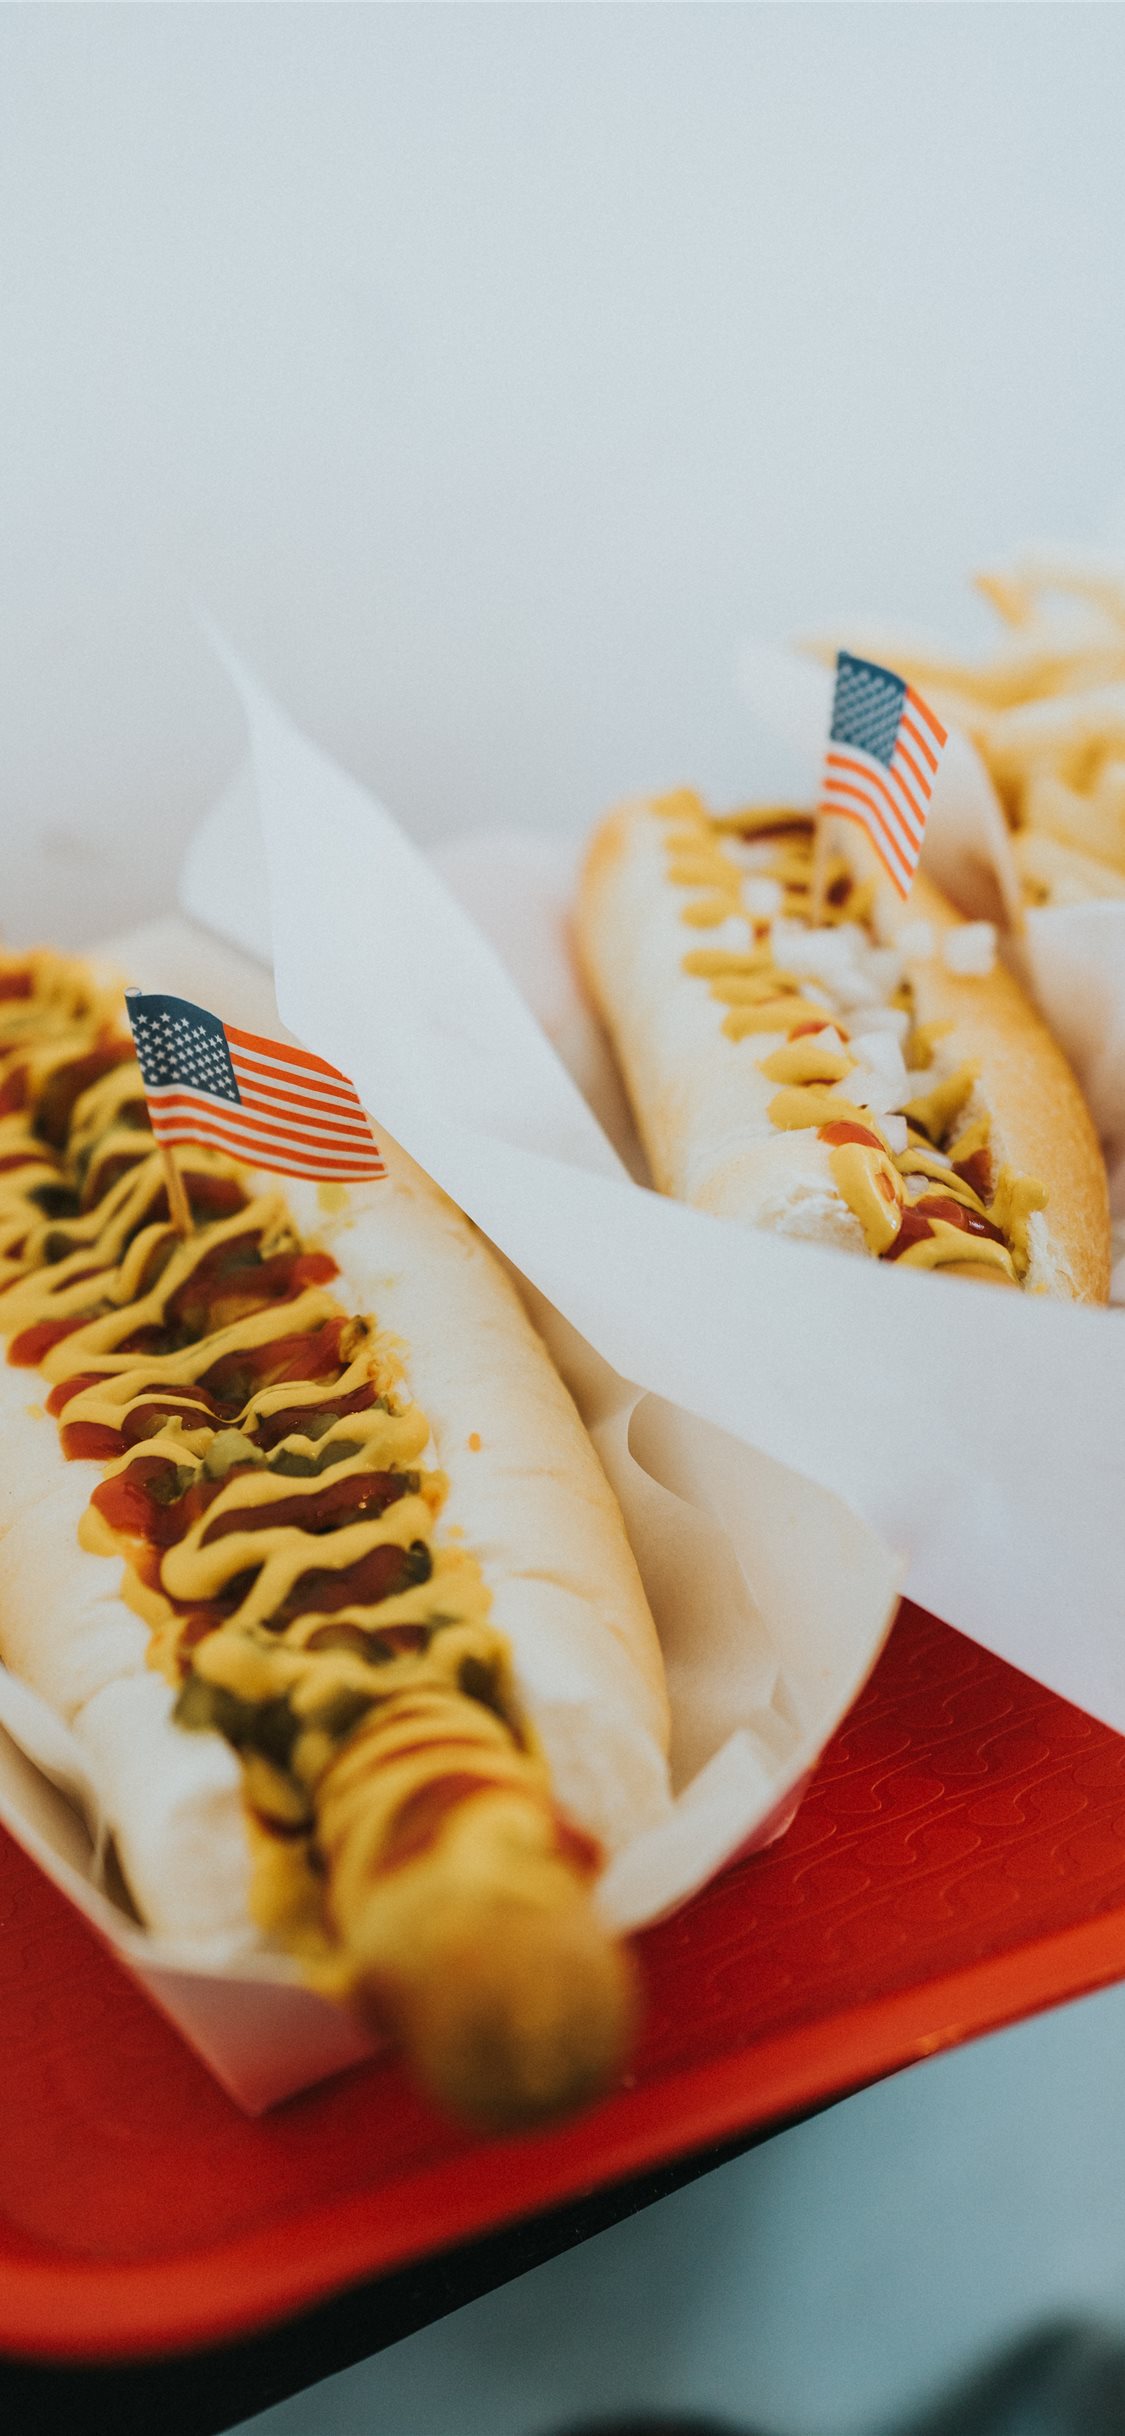 7 fun facts about hot dogs for National Hot Dog Day 2021